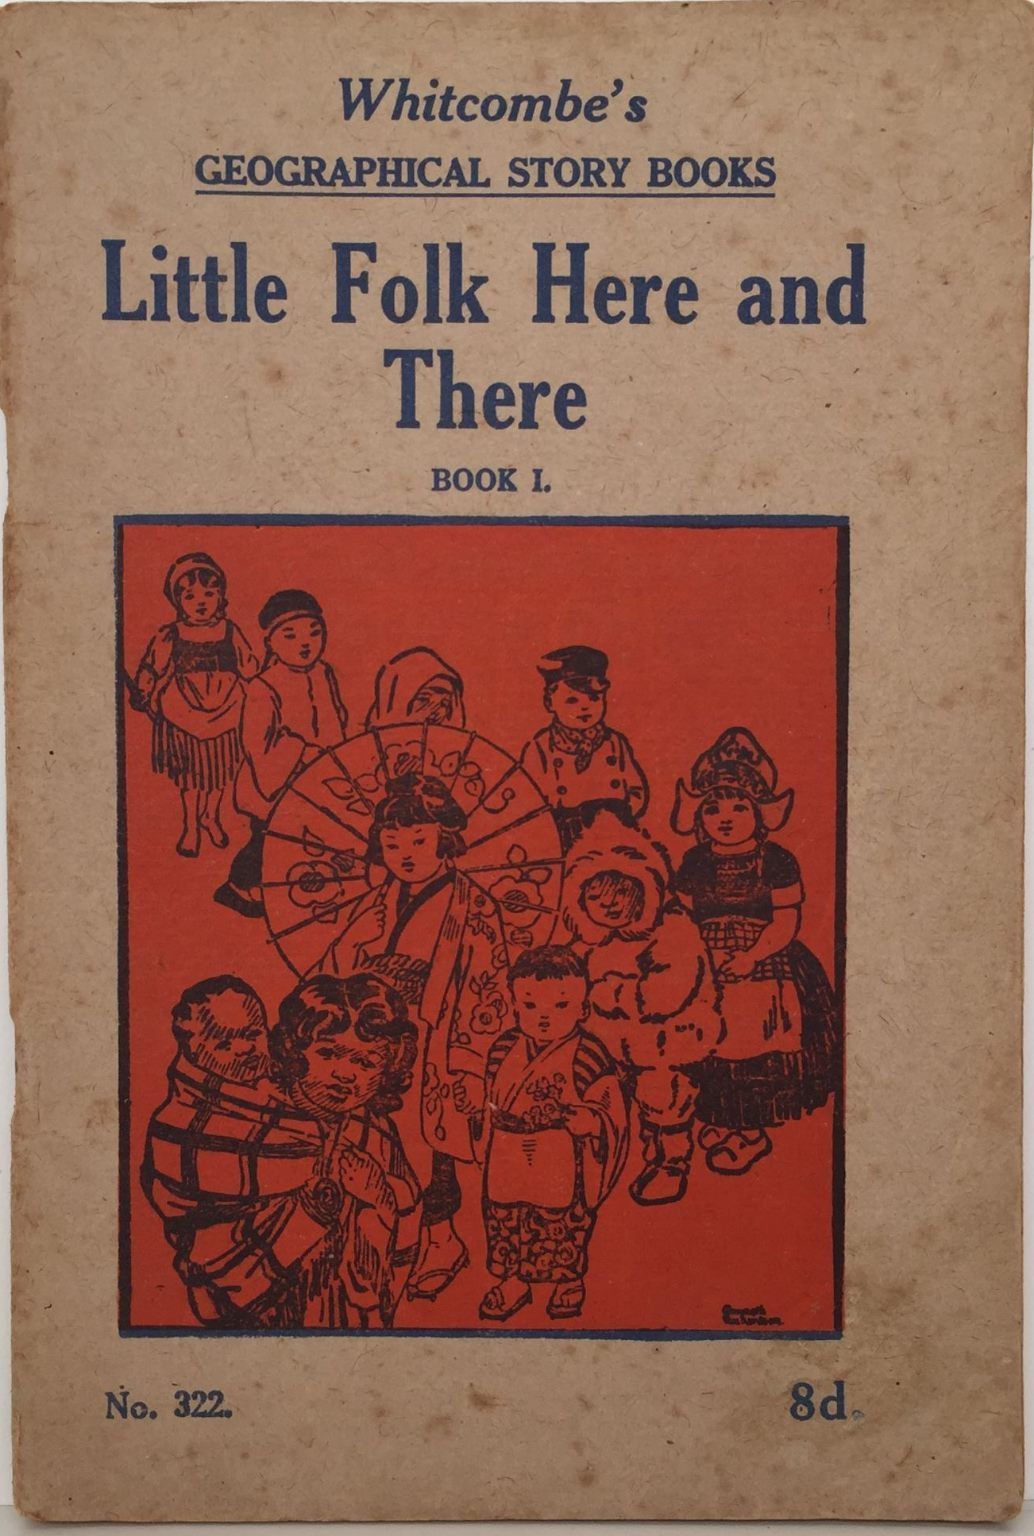 LITTLE FOLK HERE AND THERE: Whitcombe's Story Books No 322